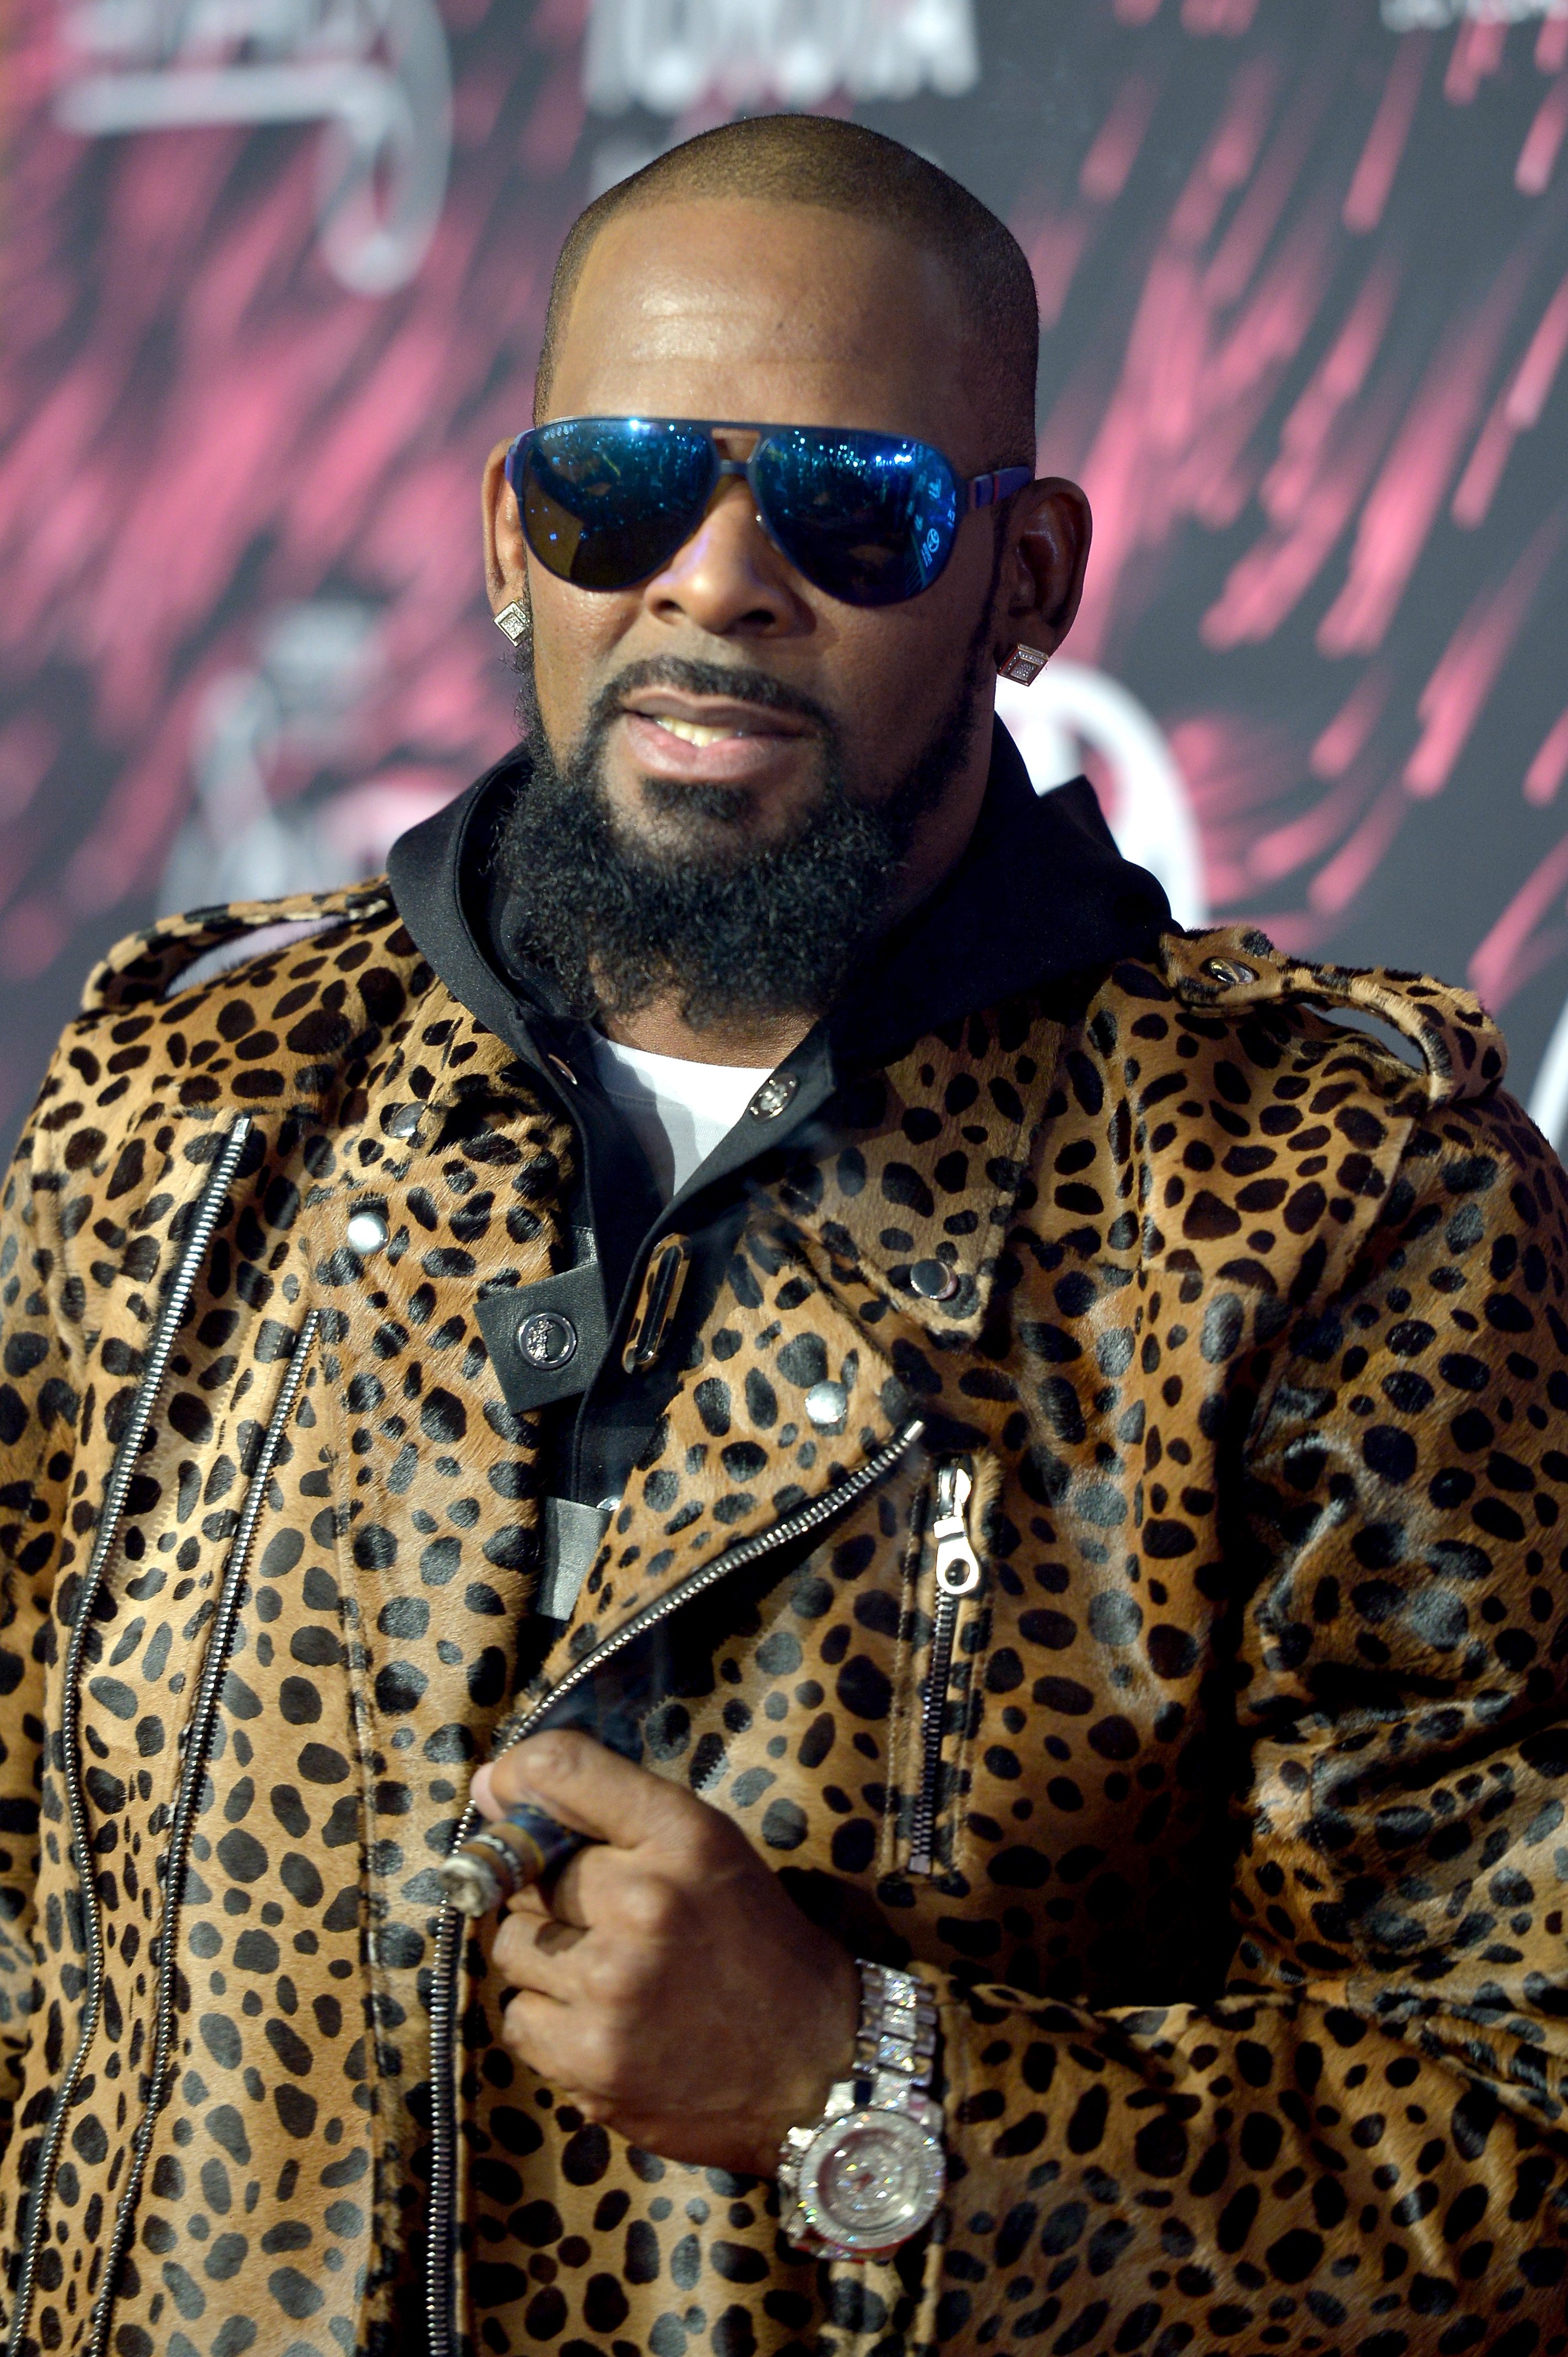 R. Kelly attends the 2015 Soul Train Music Awards at the Orleans Arena on November 6, 2015, in Las Vegas, Nevada. | Source: Getty Images